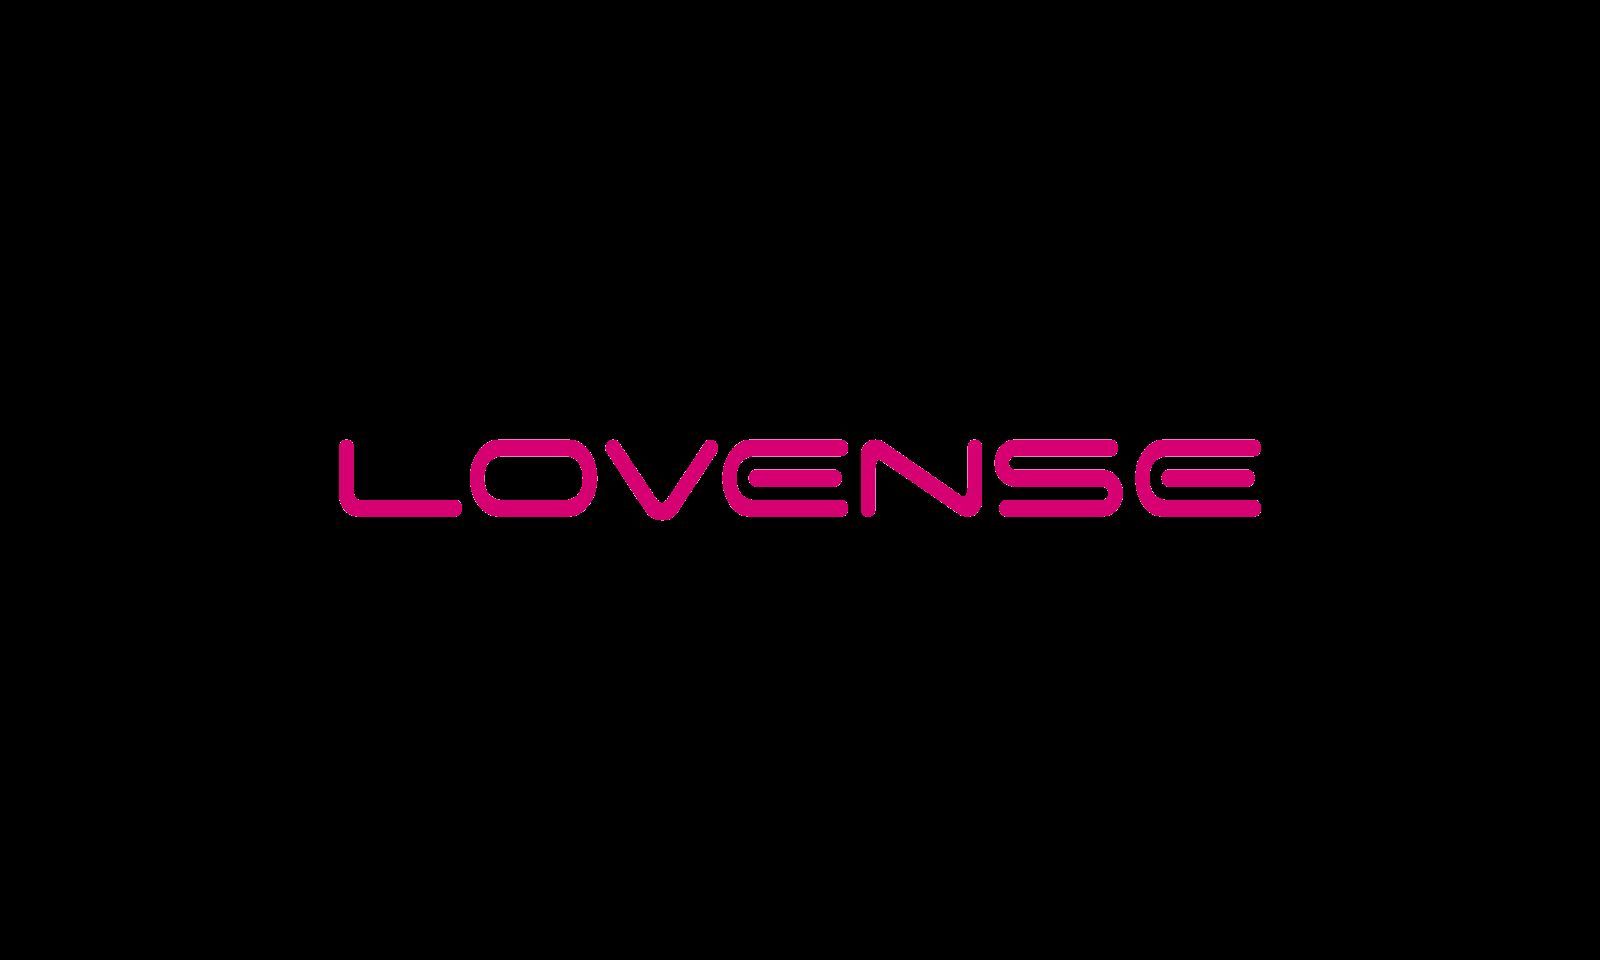 Lovense Media Player Provides Full VR and Sex Toy Immersion